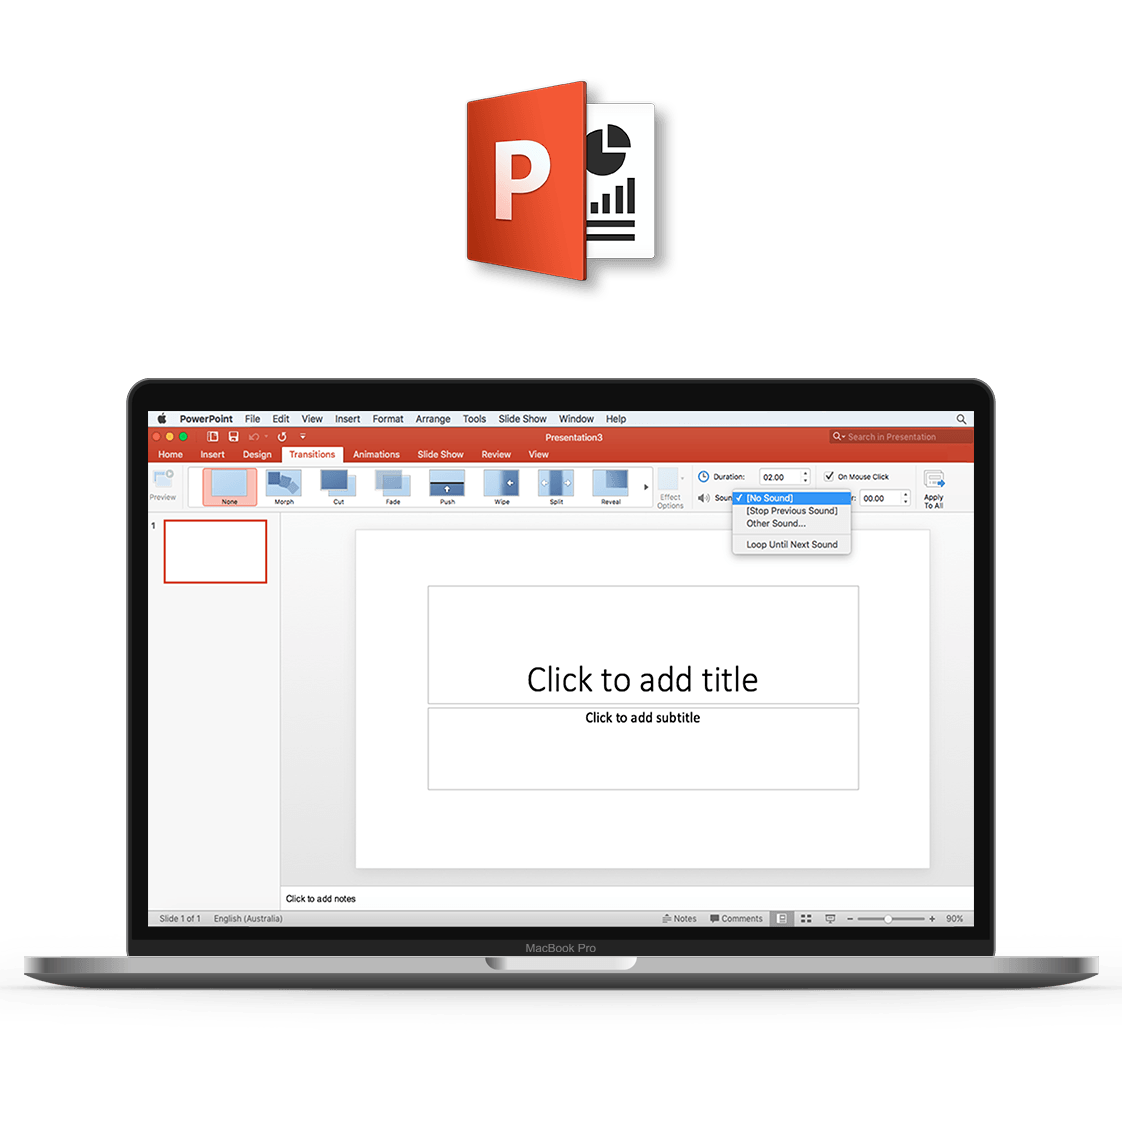 what is the cheapest price for microsoft office 2016 for mac?